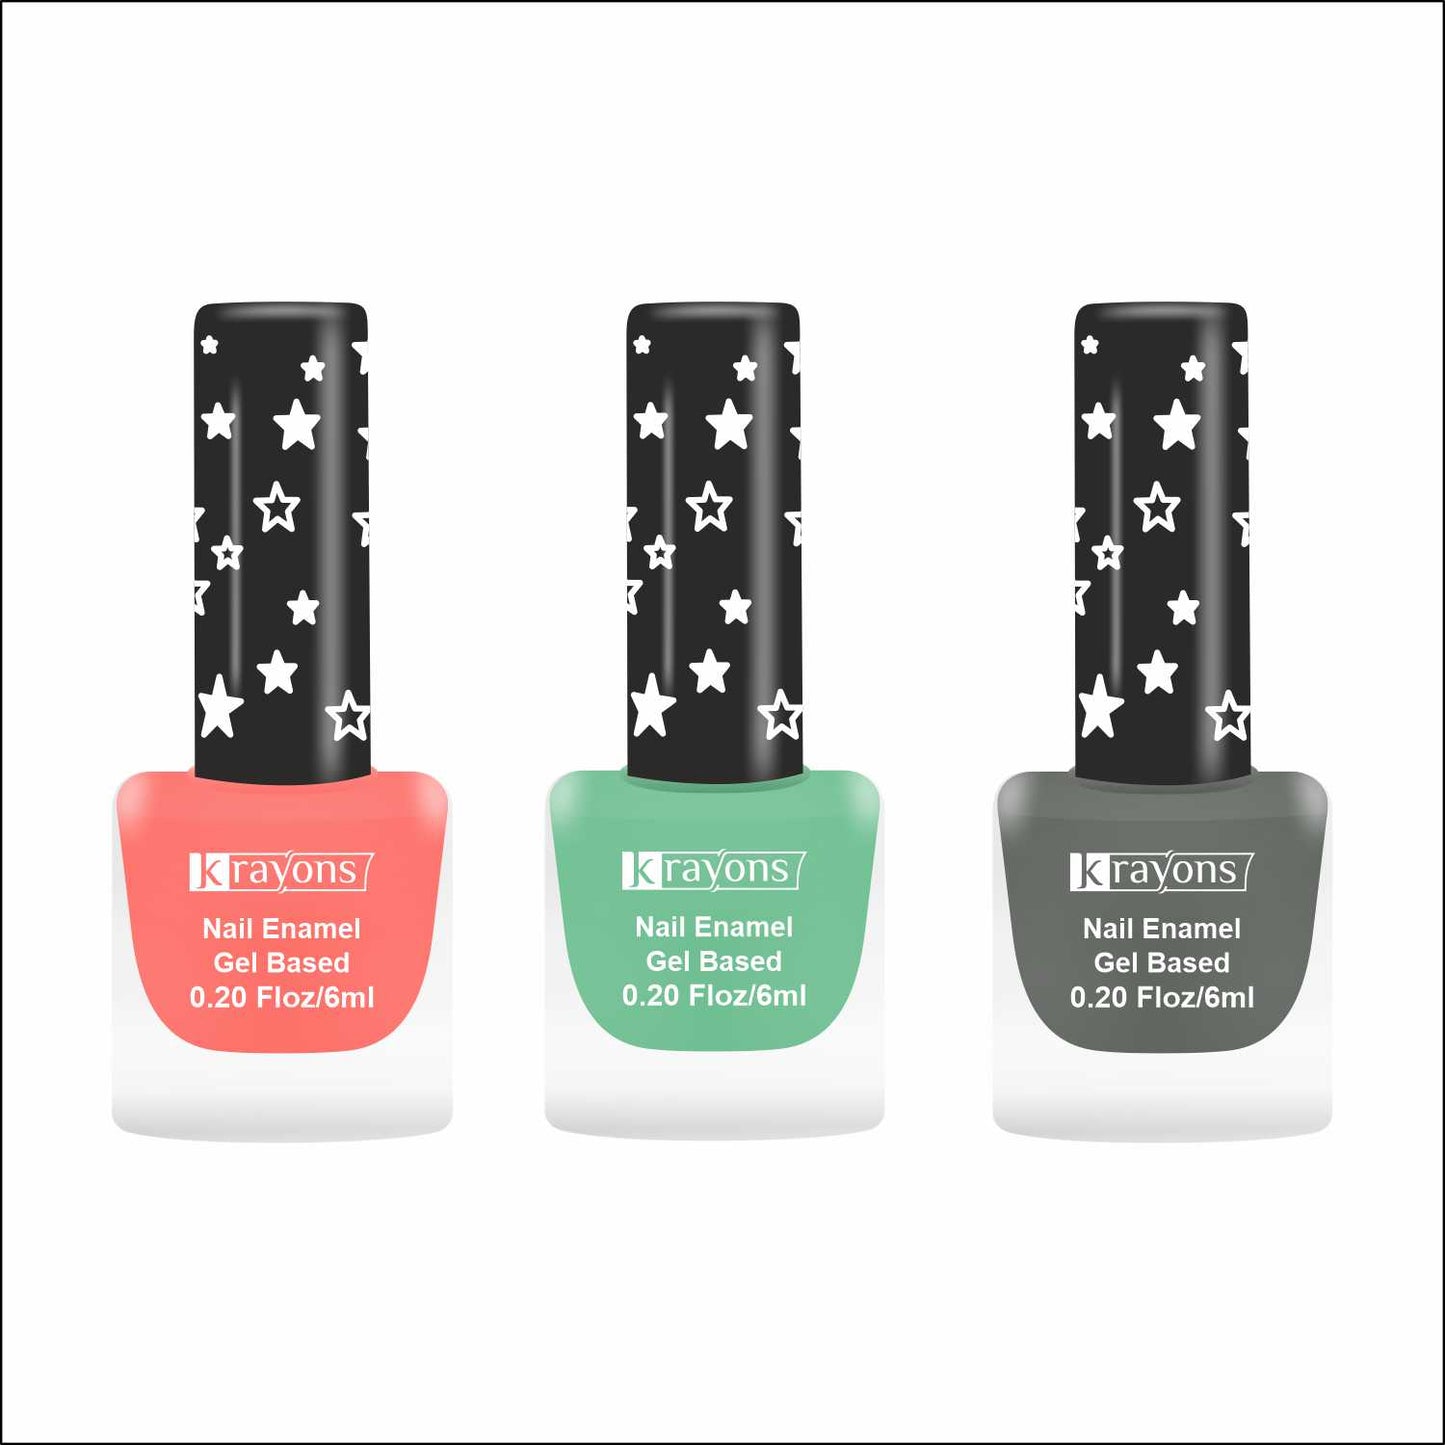 Krayons Cute Super Matte Finish Nail Enamel, Quick Dry, LongLasting, Blossom Peach, Mint Green, Charcoal Grey, 6ml Each (Pack of 3)